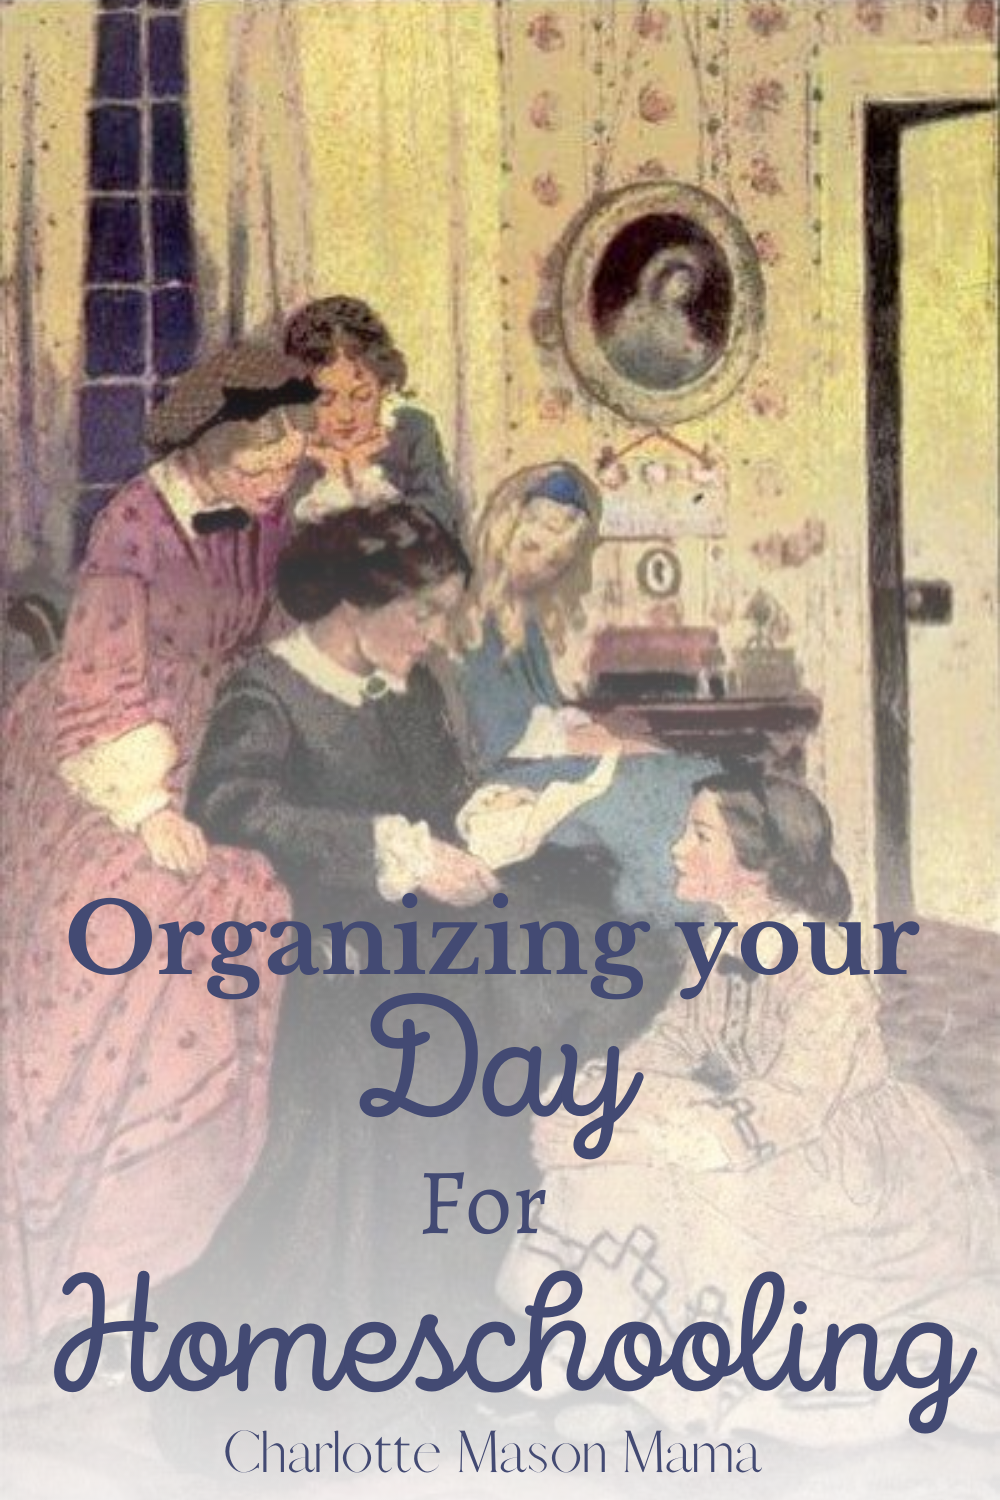 Organizing Your Day for Homeschooling